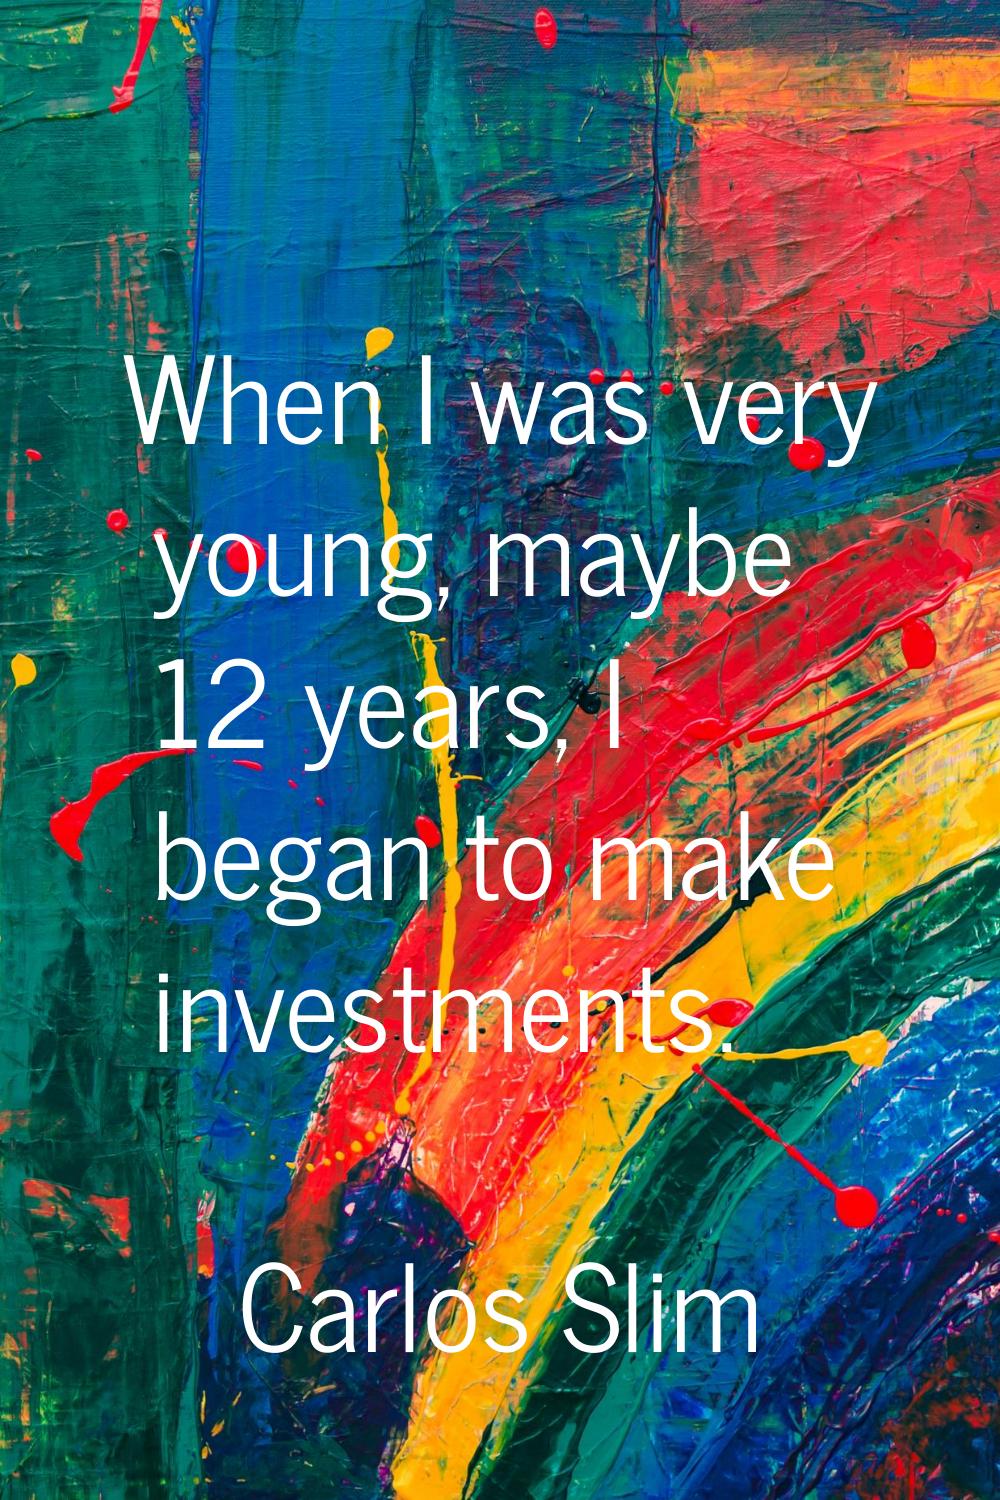 When I was very young, maybe 12 years, I began to make investments.